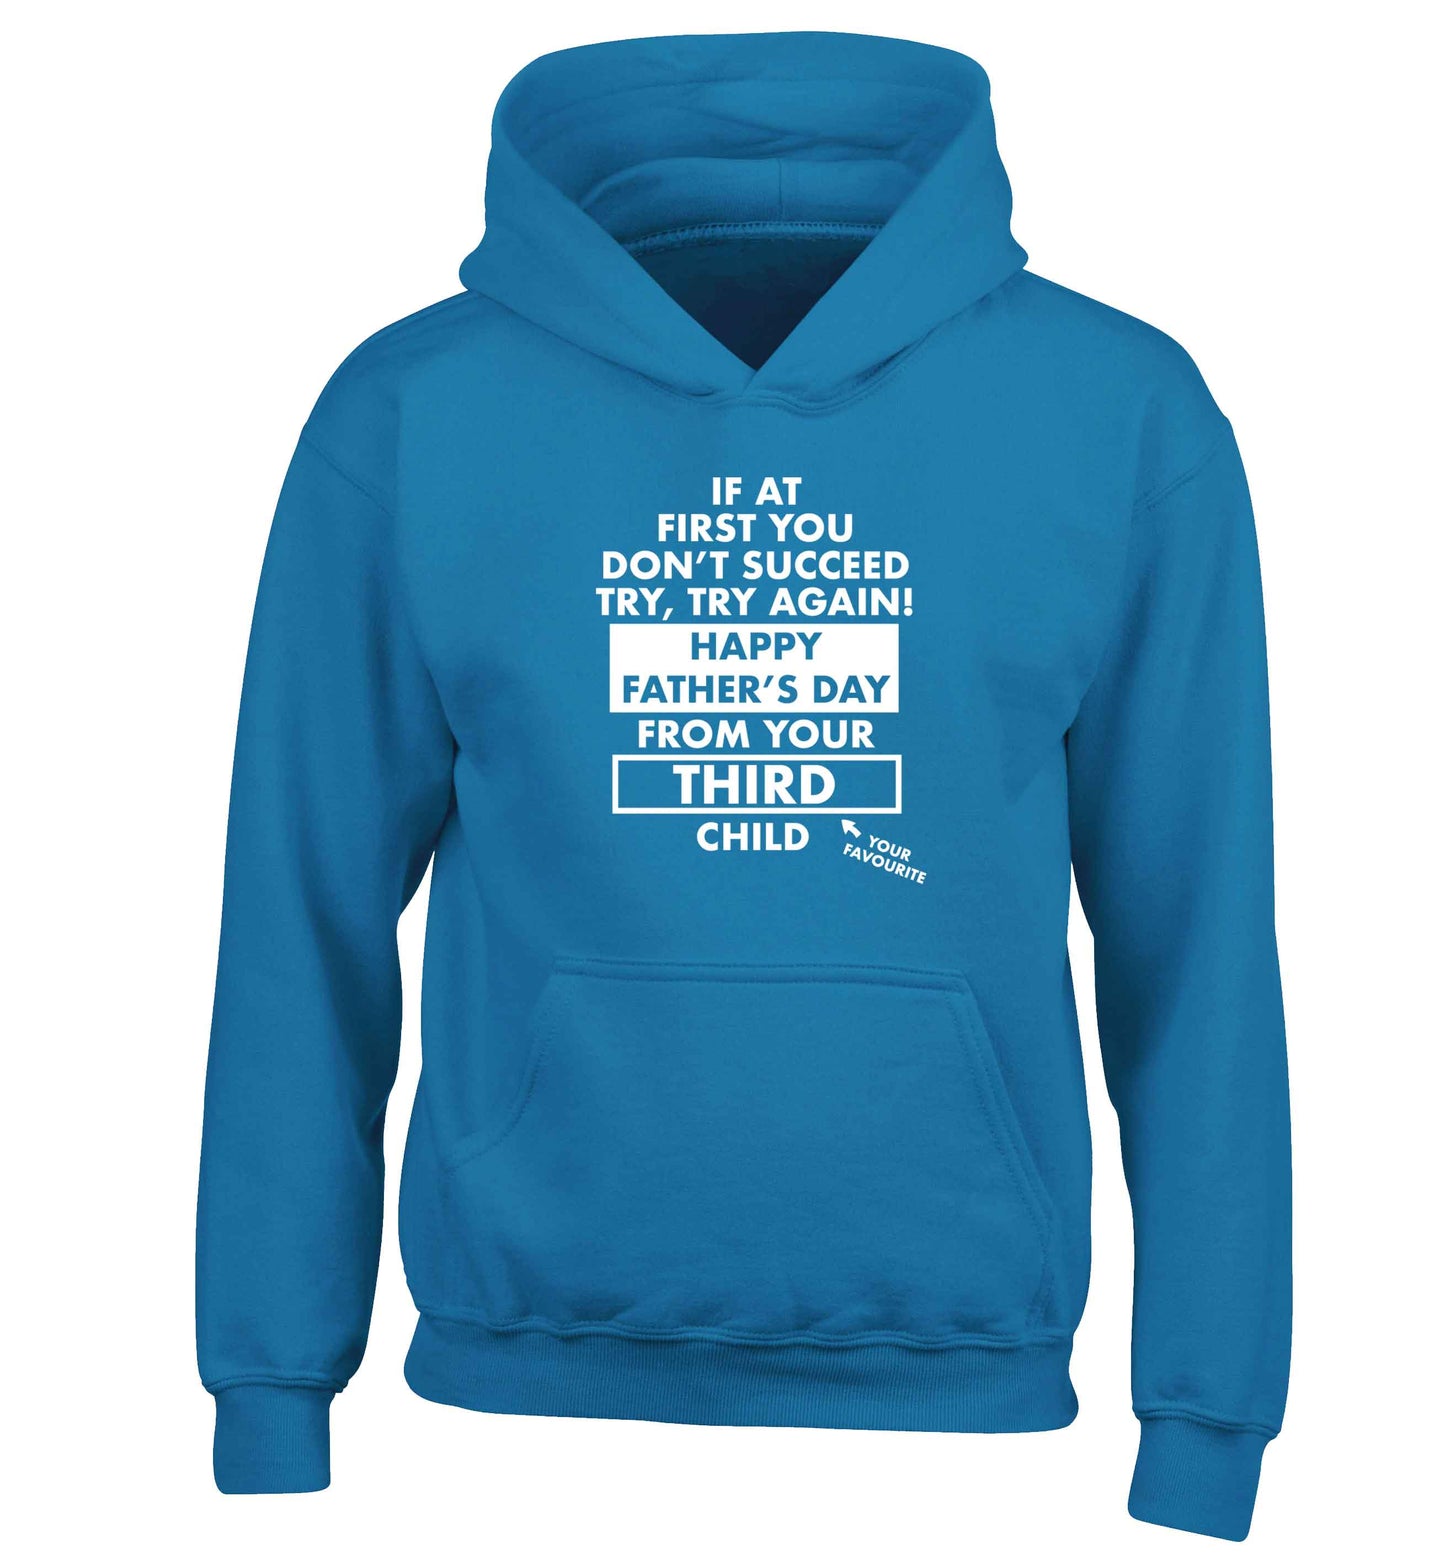 If at first you don't succeed try, try again Happy Father's day from your third child! children's blue hoodie 12-13 Years